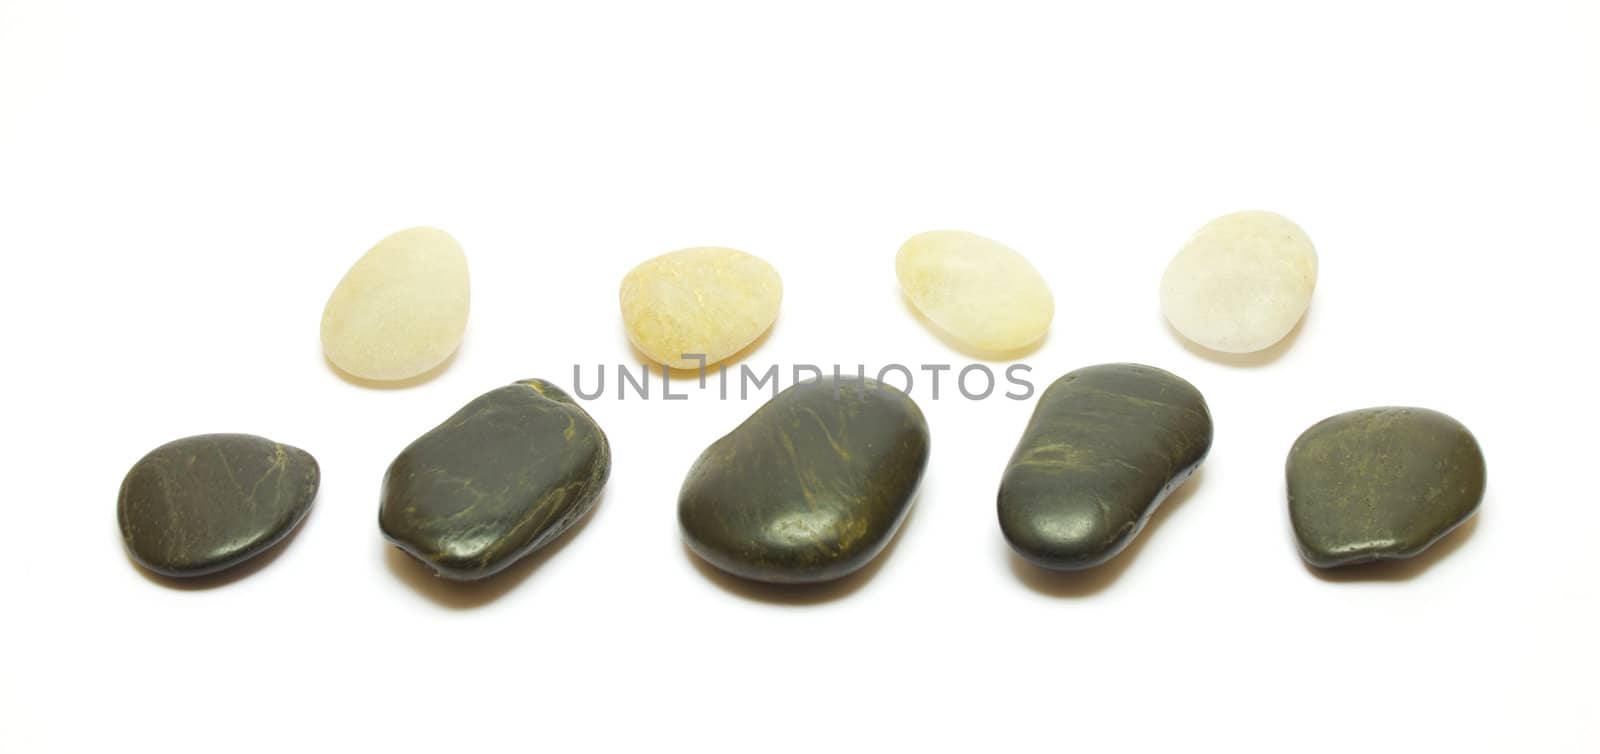 Black and white stones row isolated on white background by ursolv